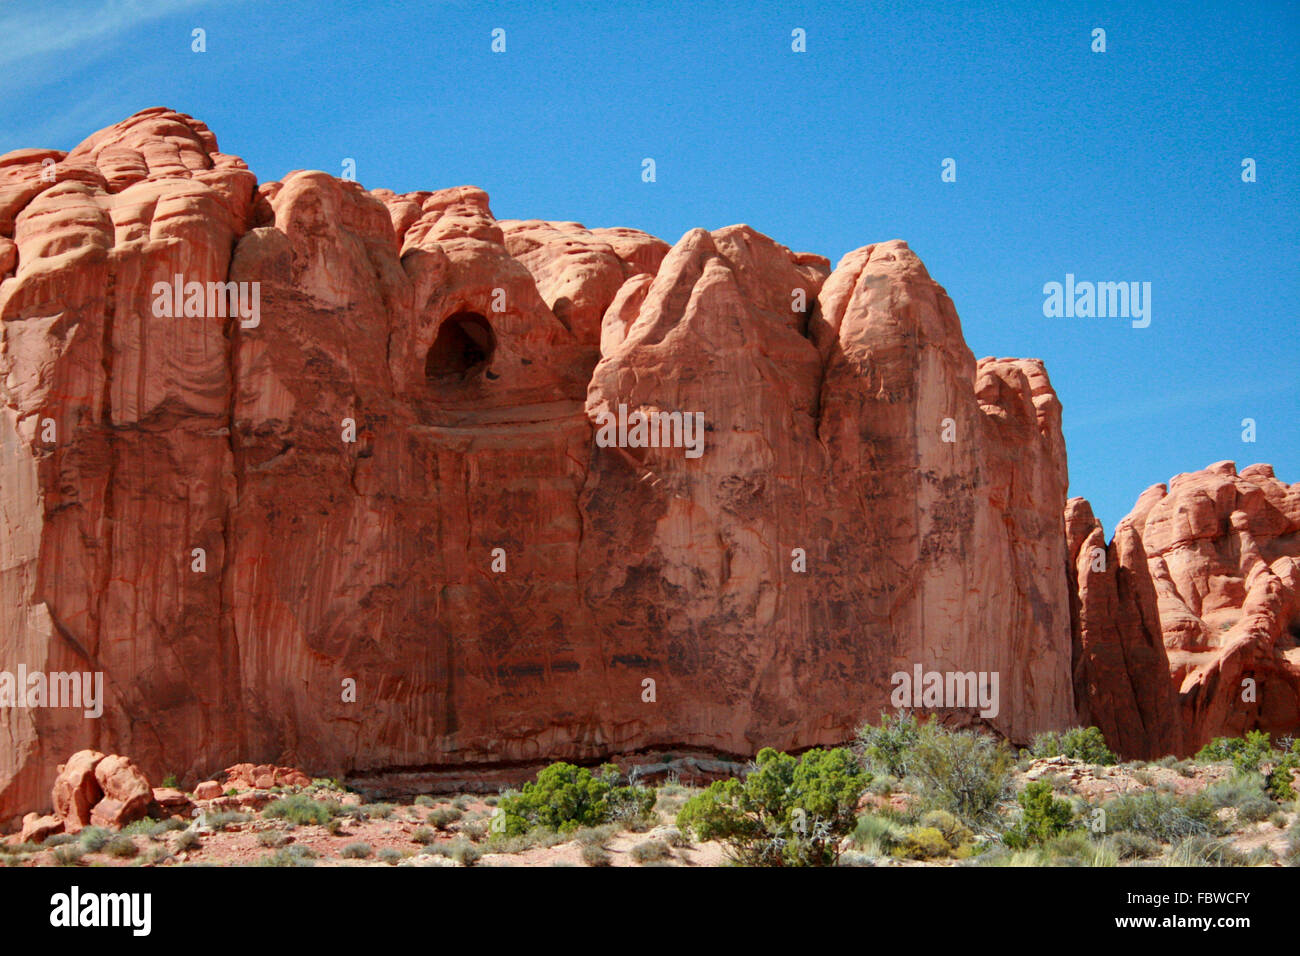 A red rock formation with a cave carved out of Entrada Sandstone in Arches National Park near Moab Utah. Stock Photo